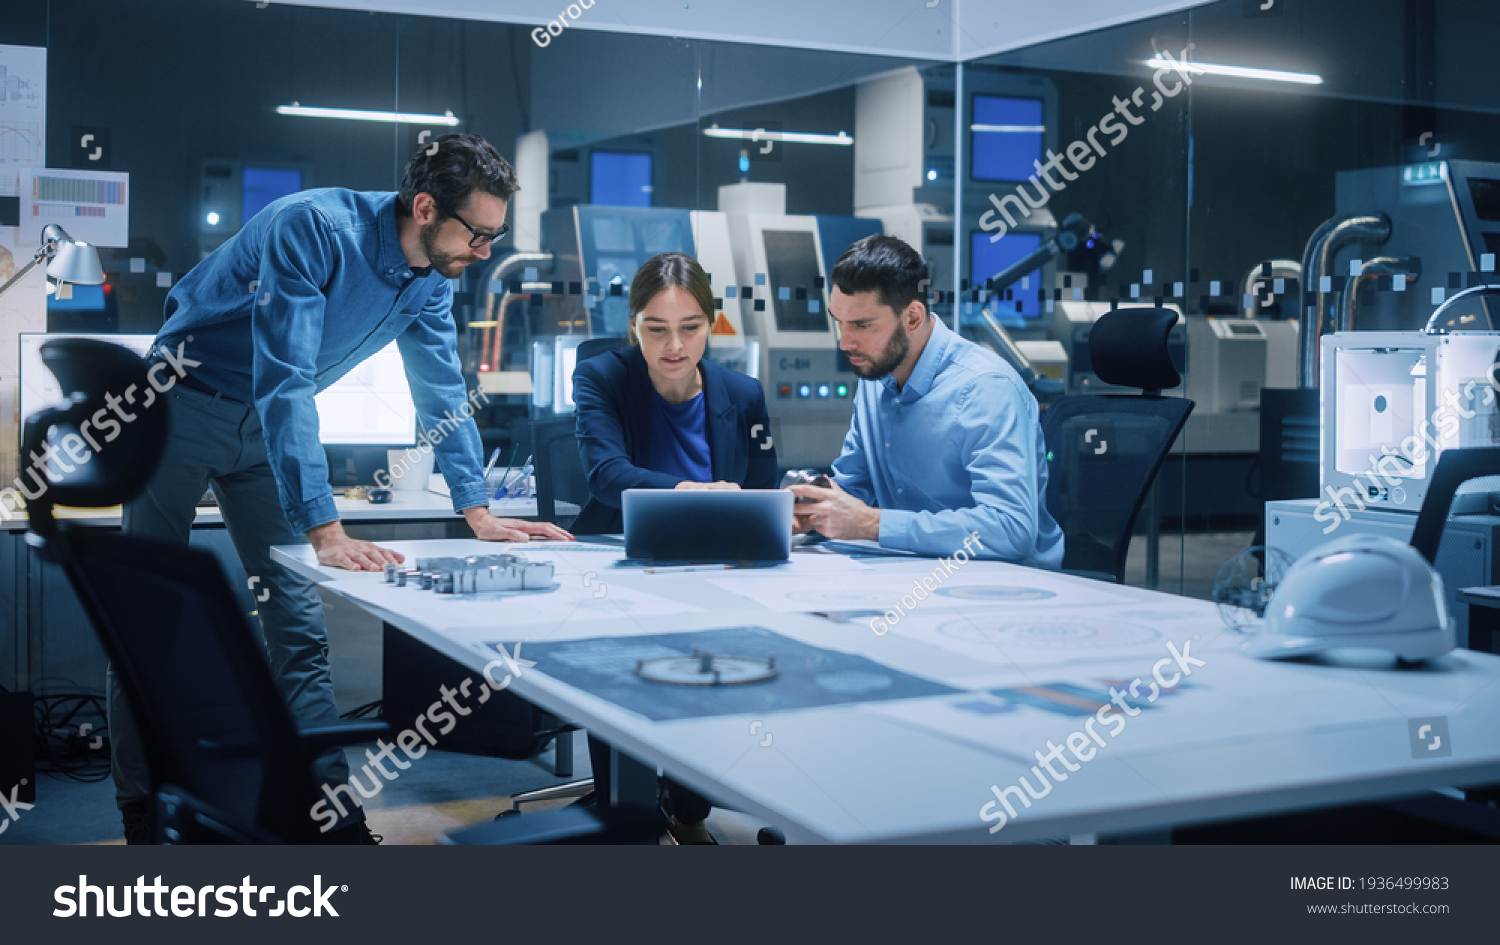 Factory Office Meeting Room: Team of Engineers Gather Around Conference Table, They Discuss Project Blueprints, Inspect Mechanism, Find Solutions, Use Laptop. Industrial Technology Factory #1936499983